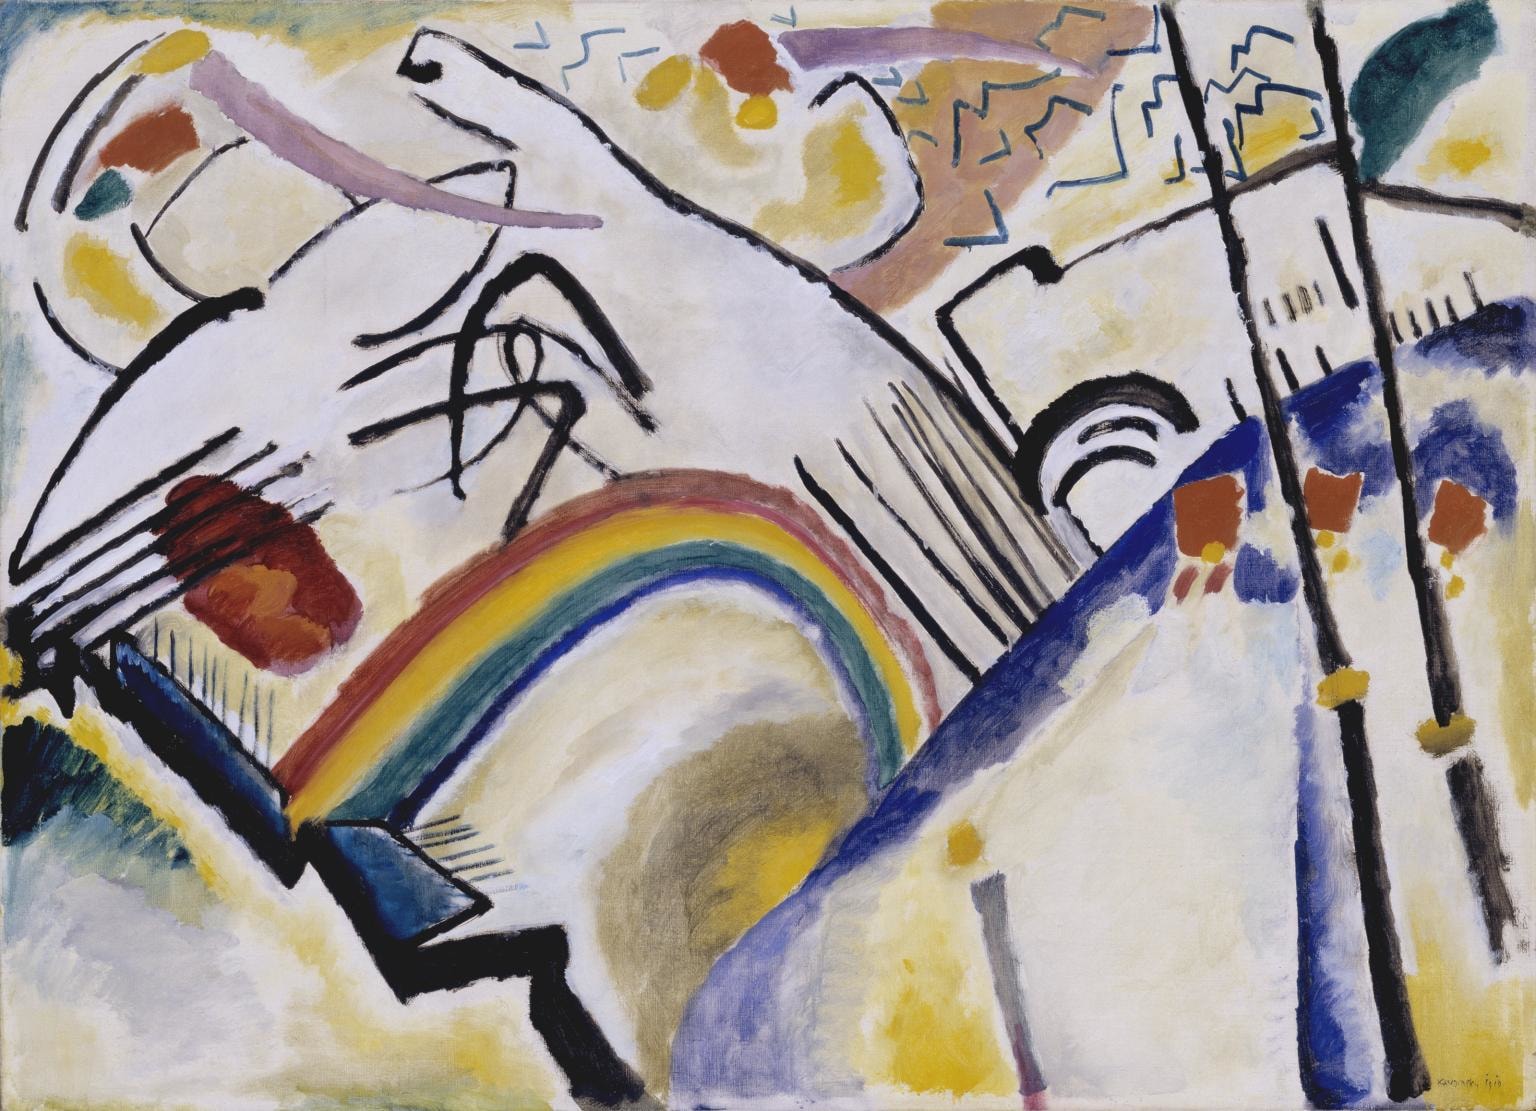 Abstract painting of rainbows by Wassily Kandinsky.